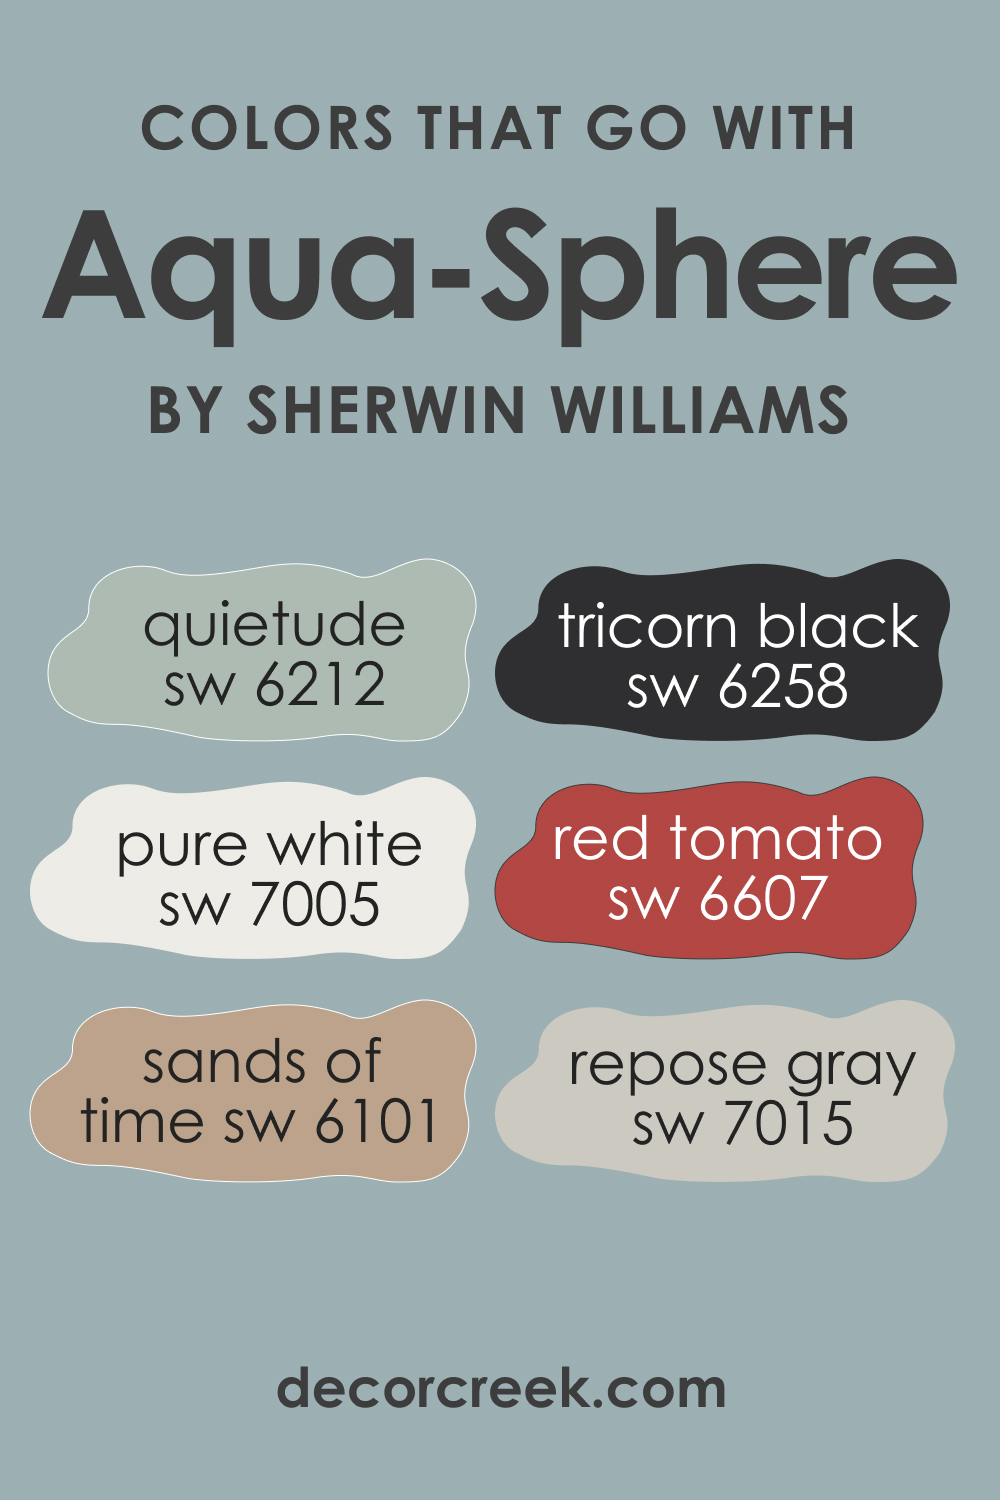 Colors That Go With Sherwin-Williams SW 7613 Aqua-Sphere